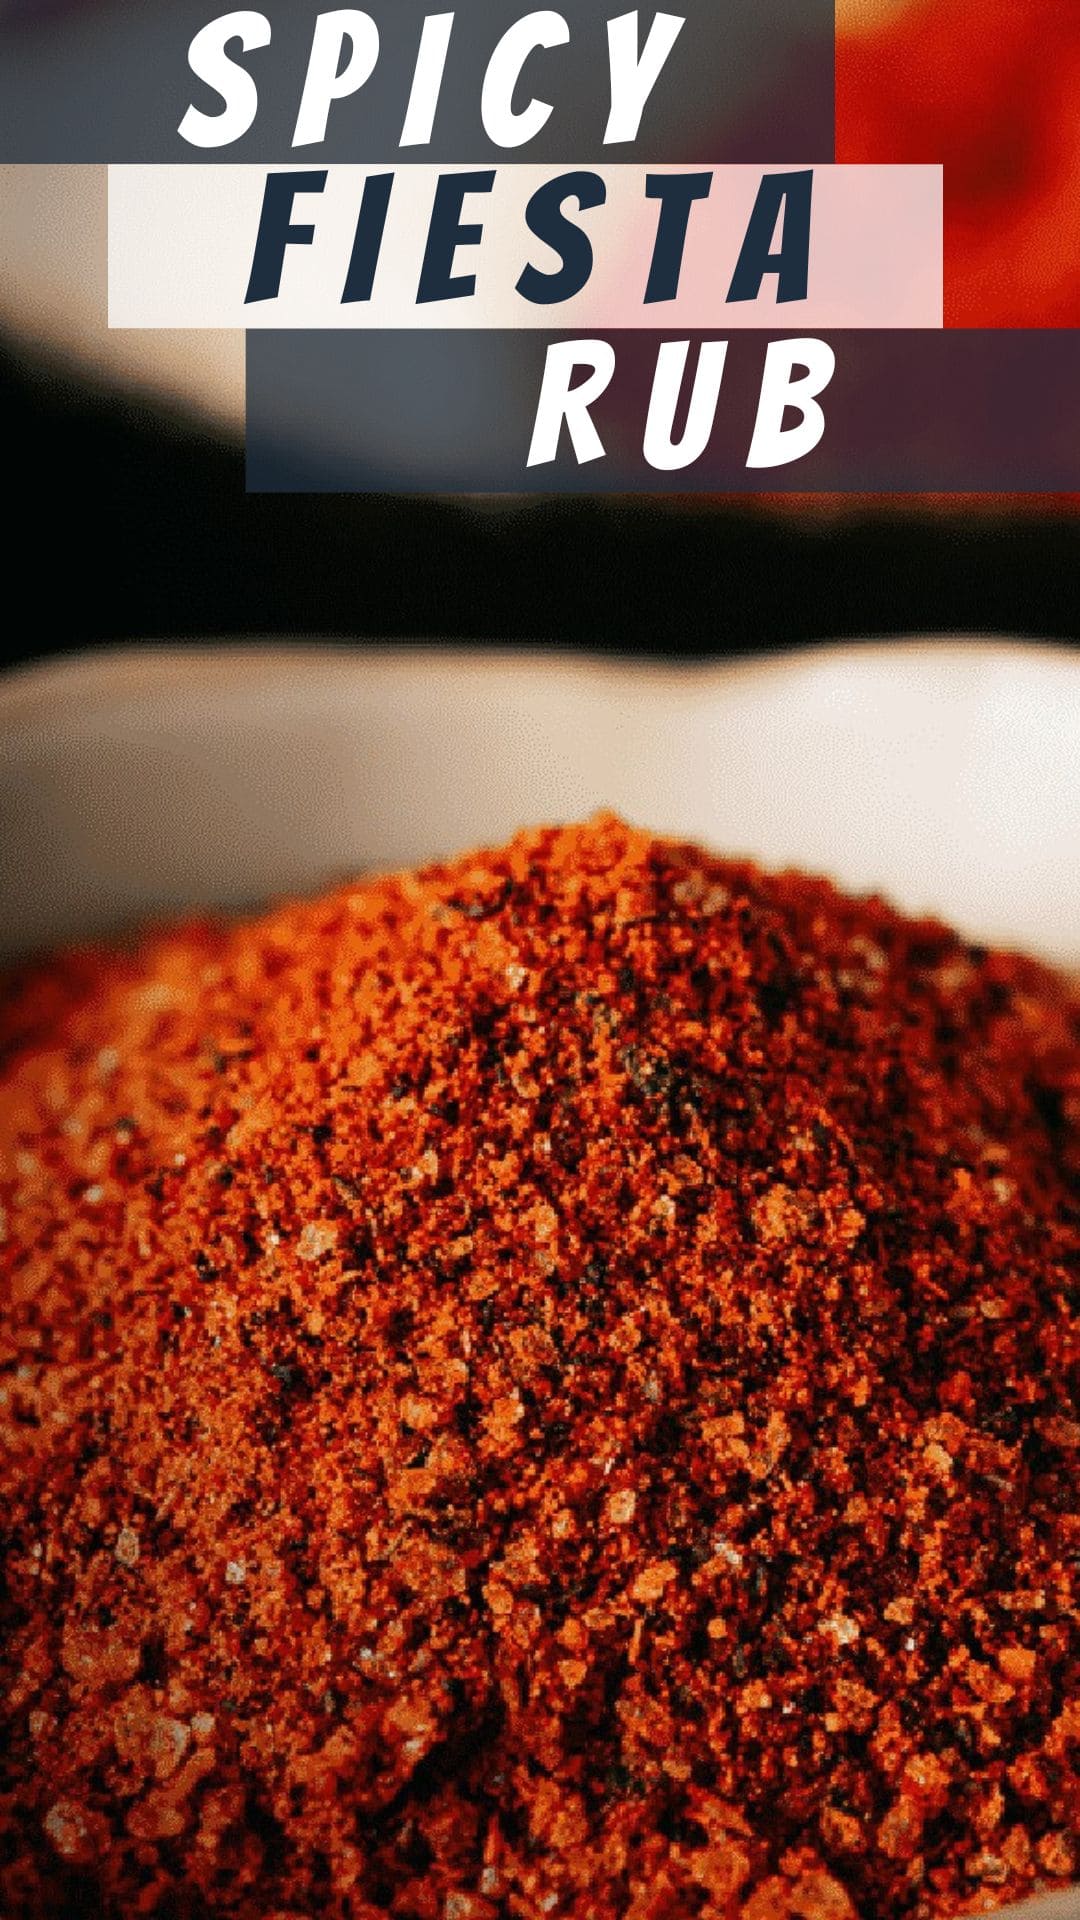 Spicy Fiesta Rub for Flavorful Dishes